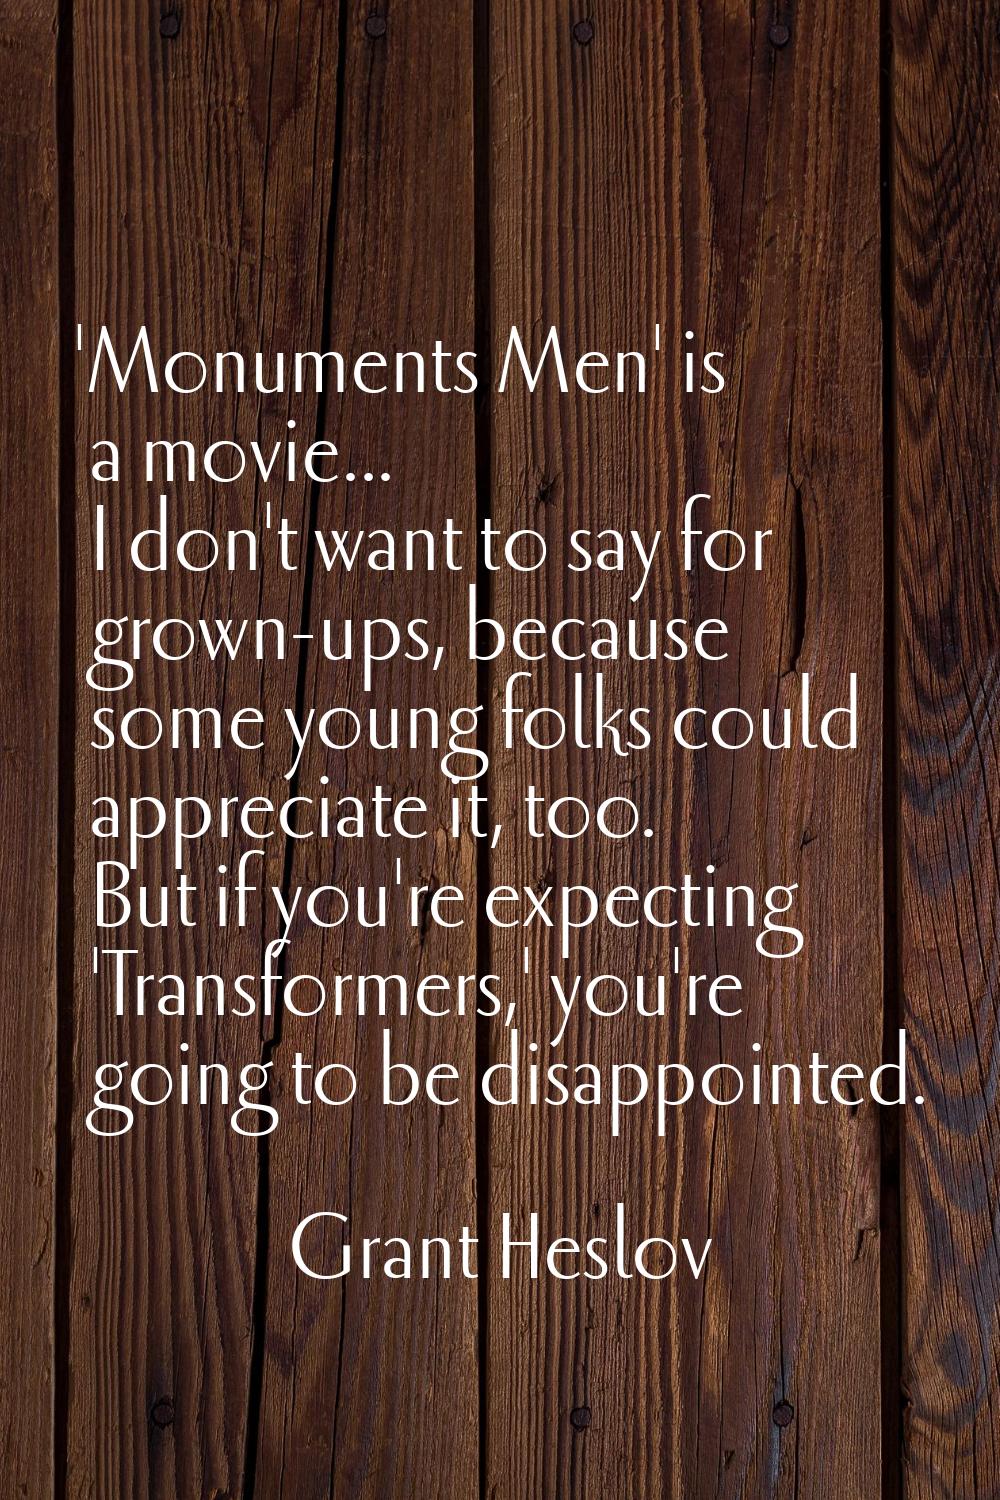 'Monuments Men' is a movie... I don't want to say for grown-ups, because some young folks could app